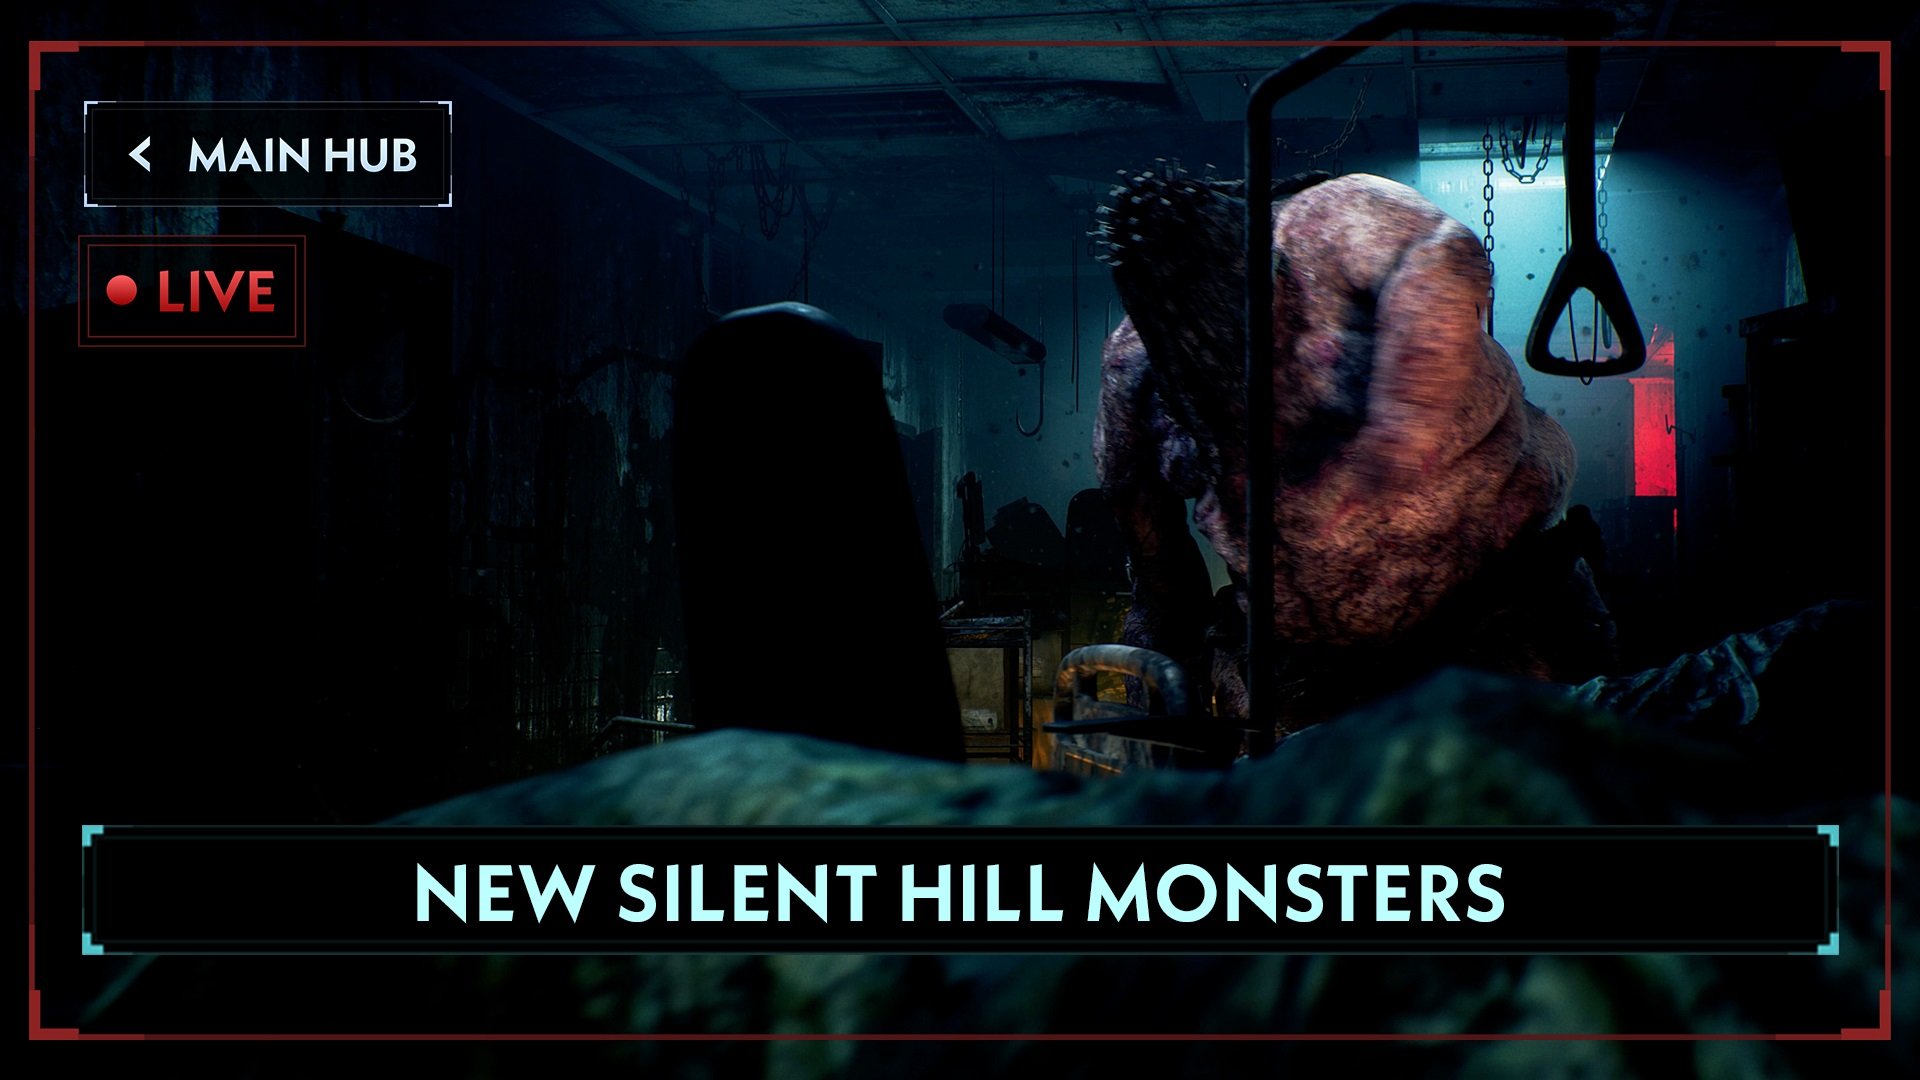 Silent Hill Ascension's Multiplayer Focus is an Interesting New